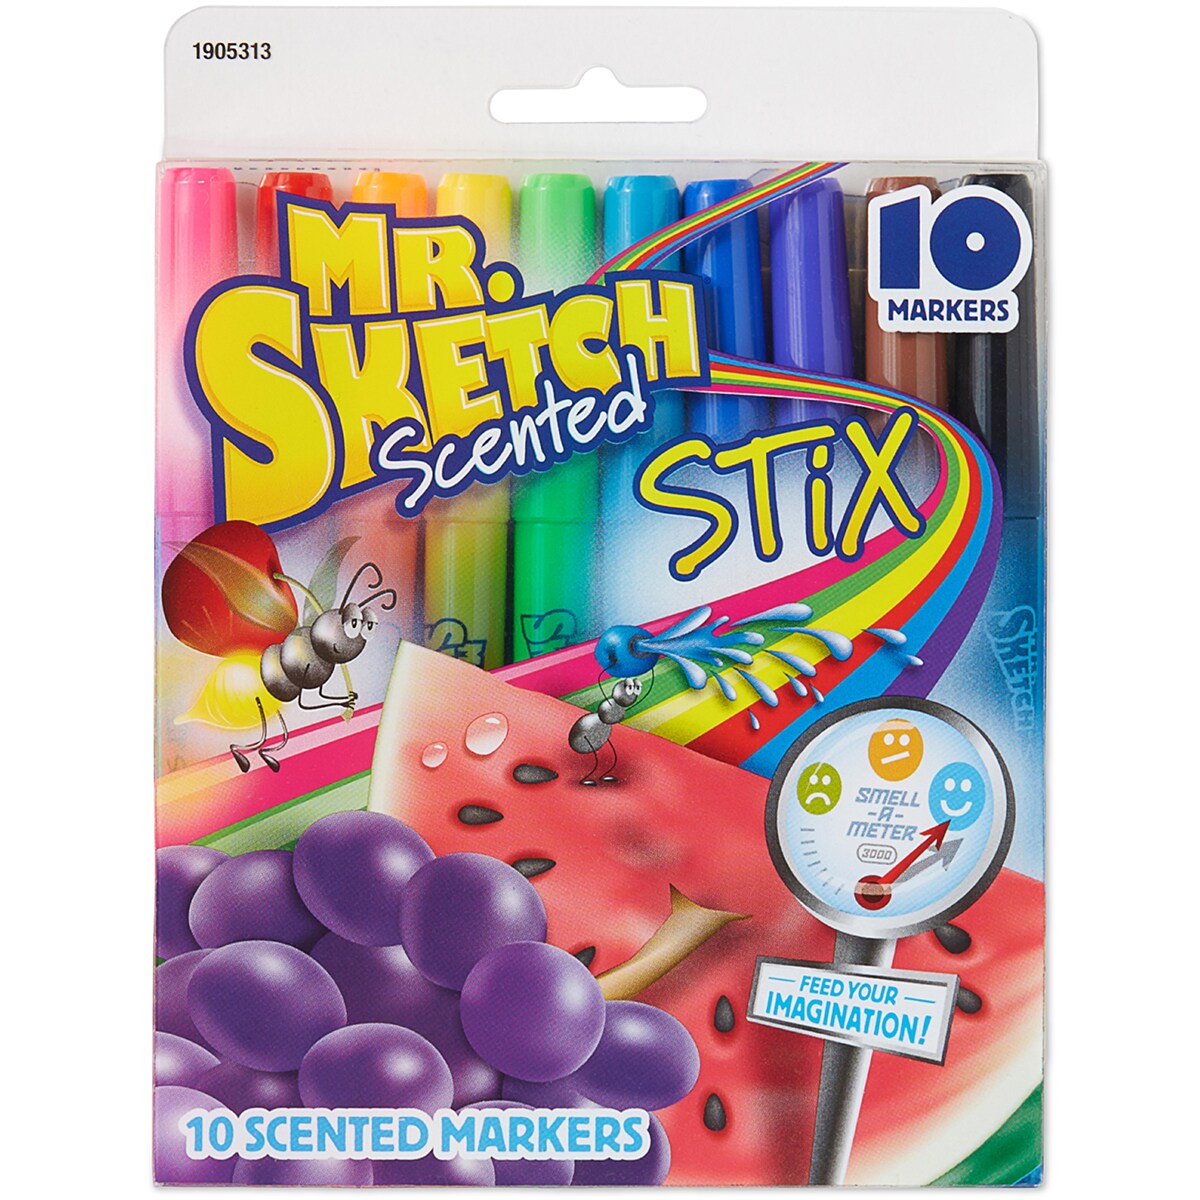 Mr. Sketch Scented Washable Markers